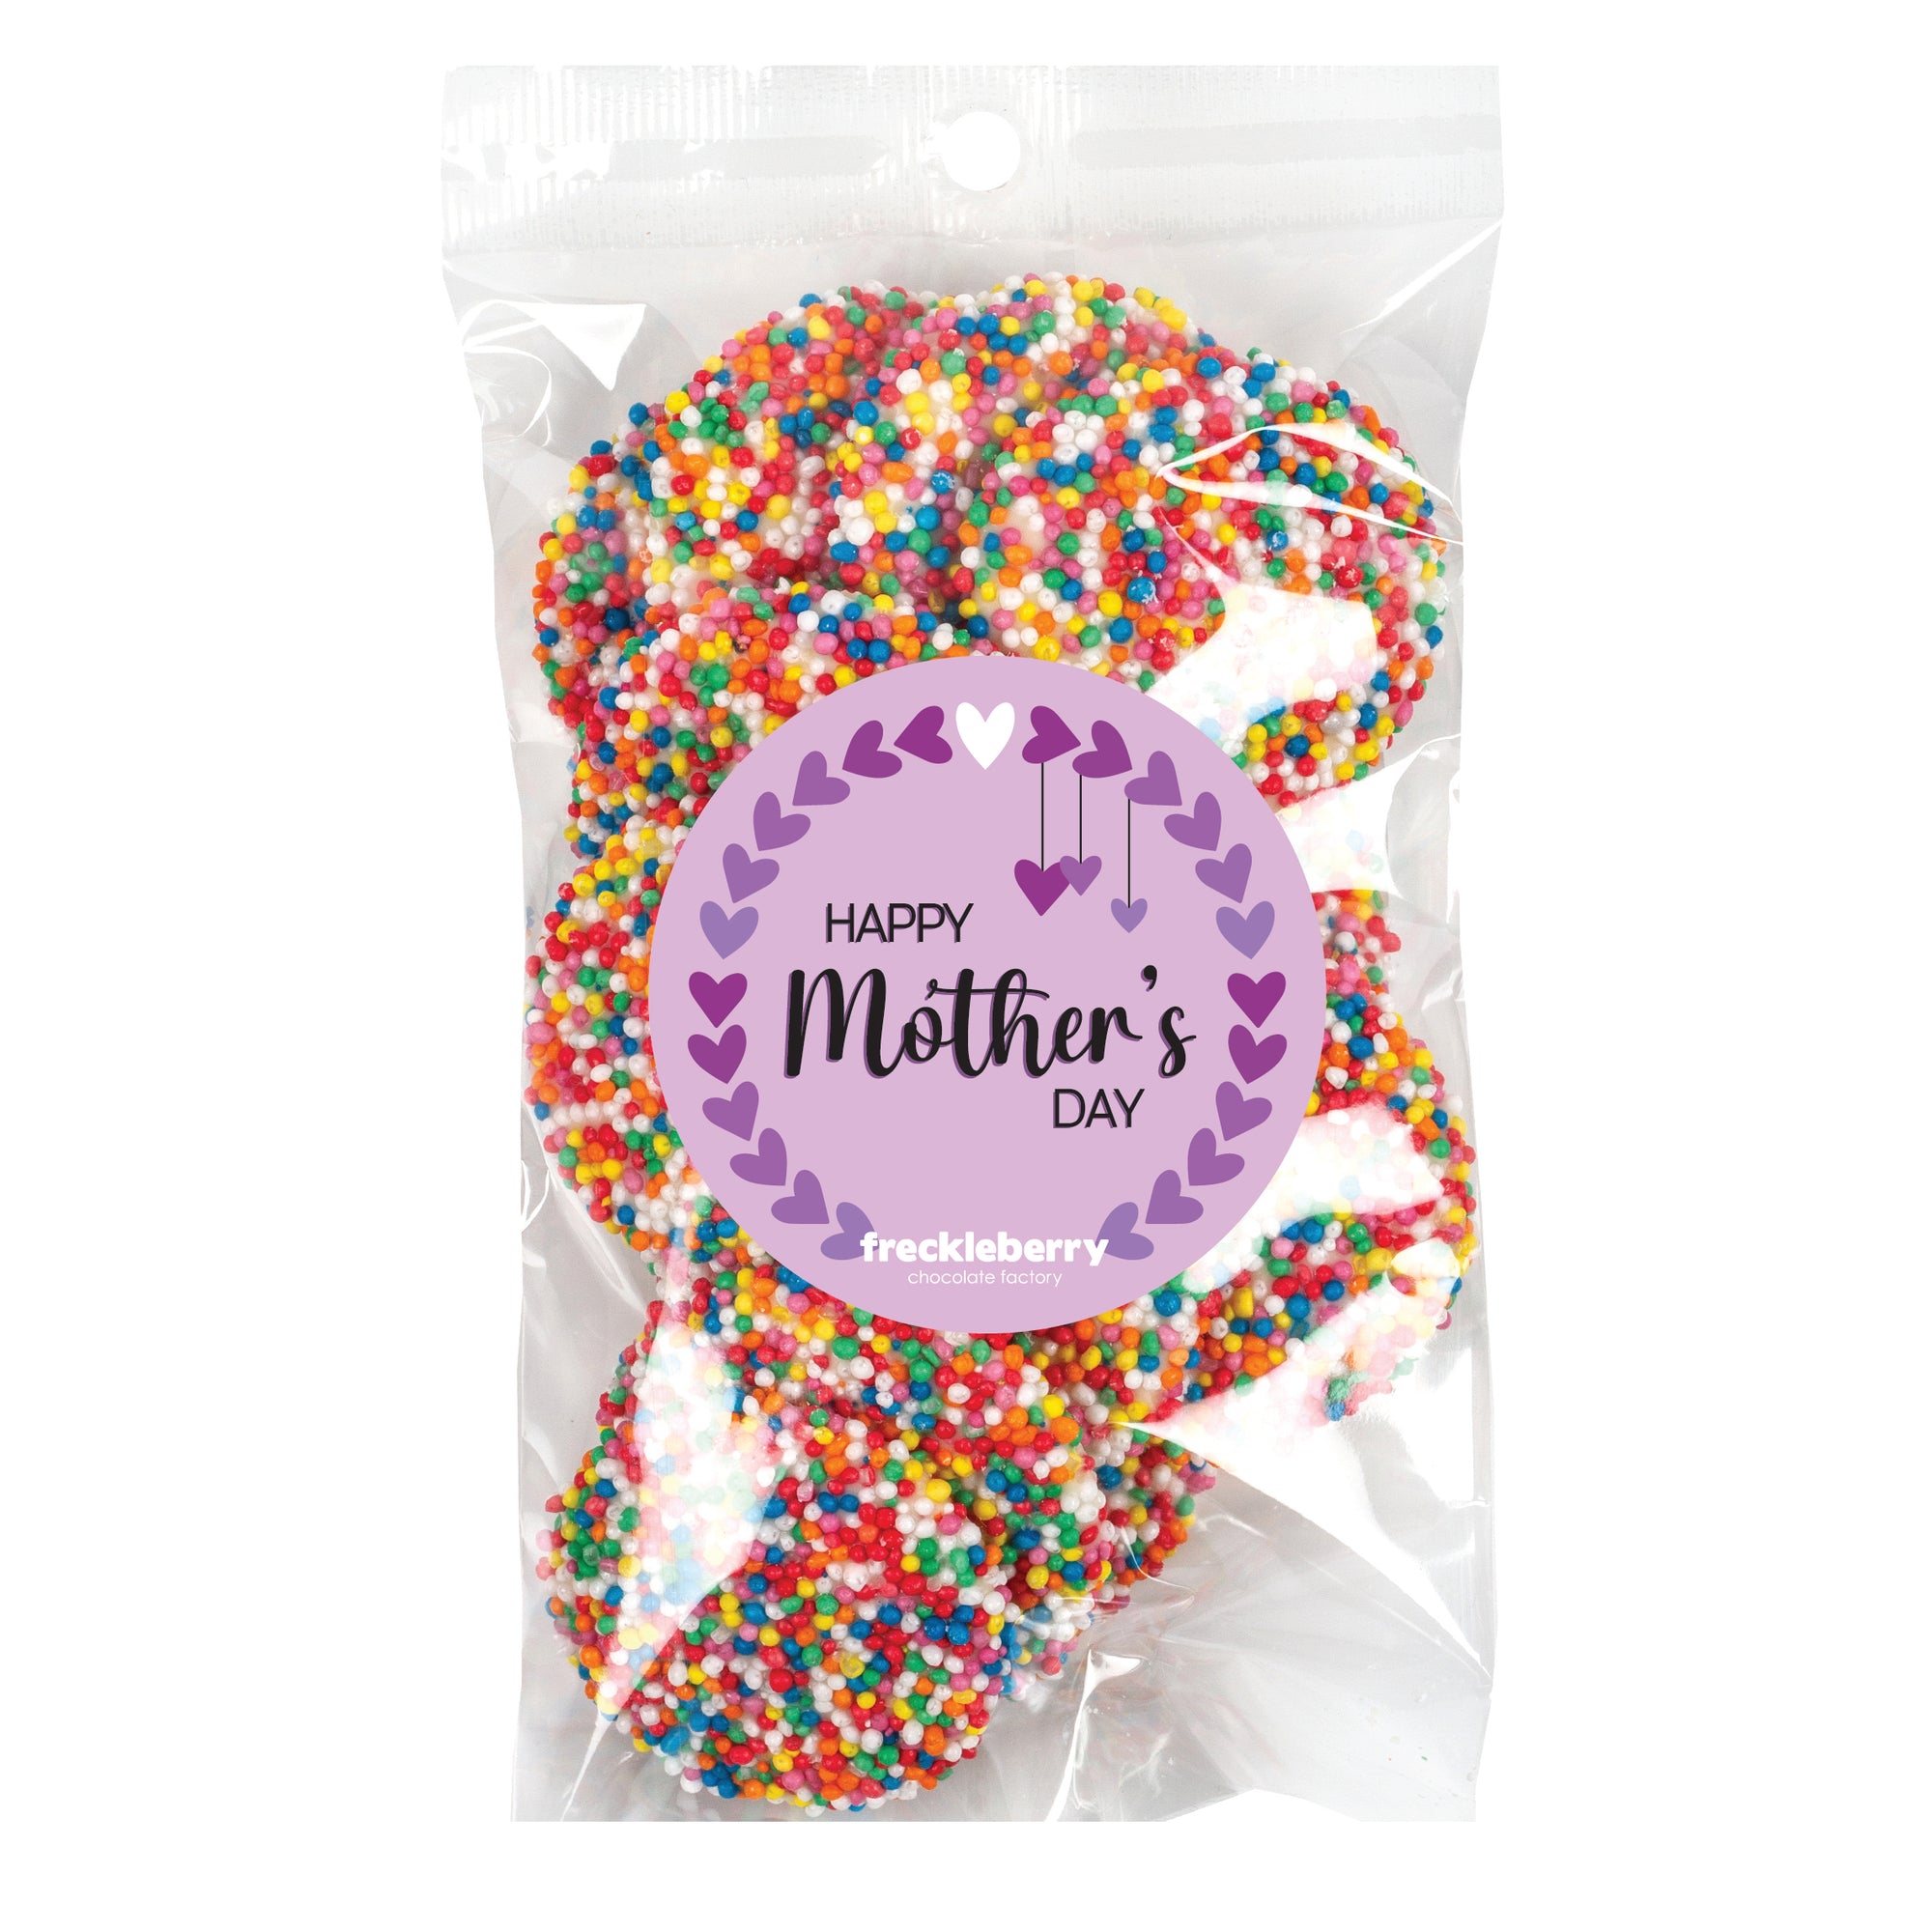 Mother's Day - White Chocolate Freckles 150g